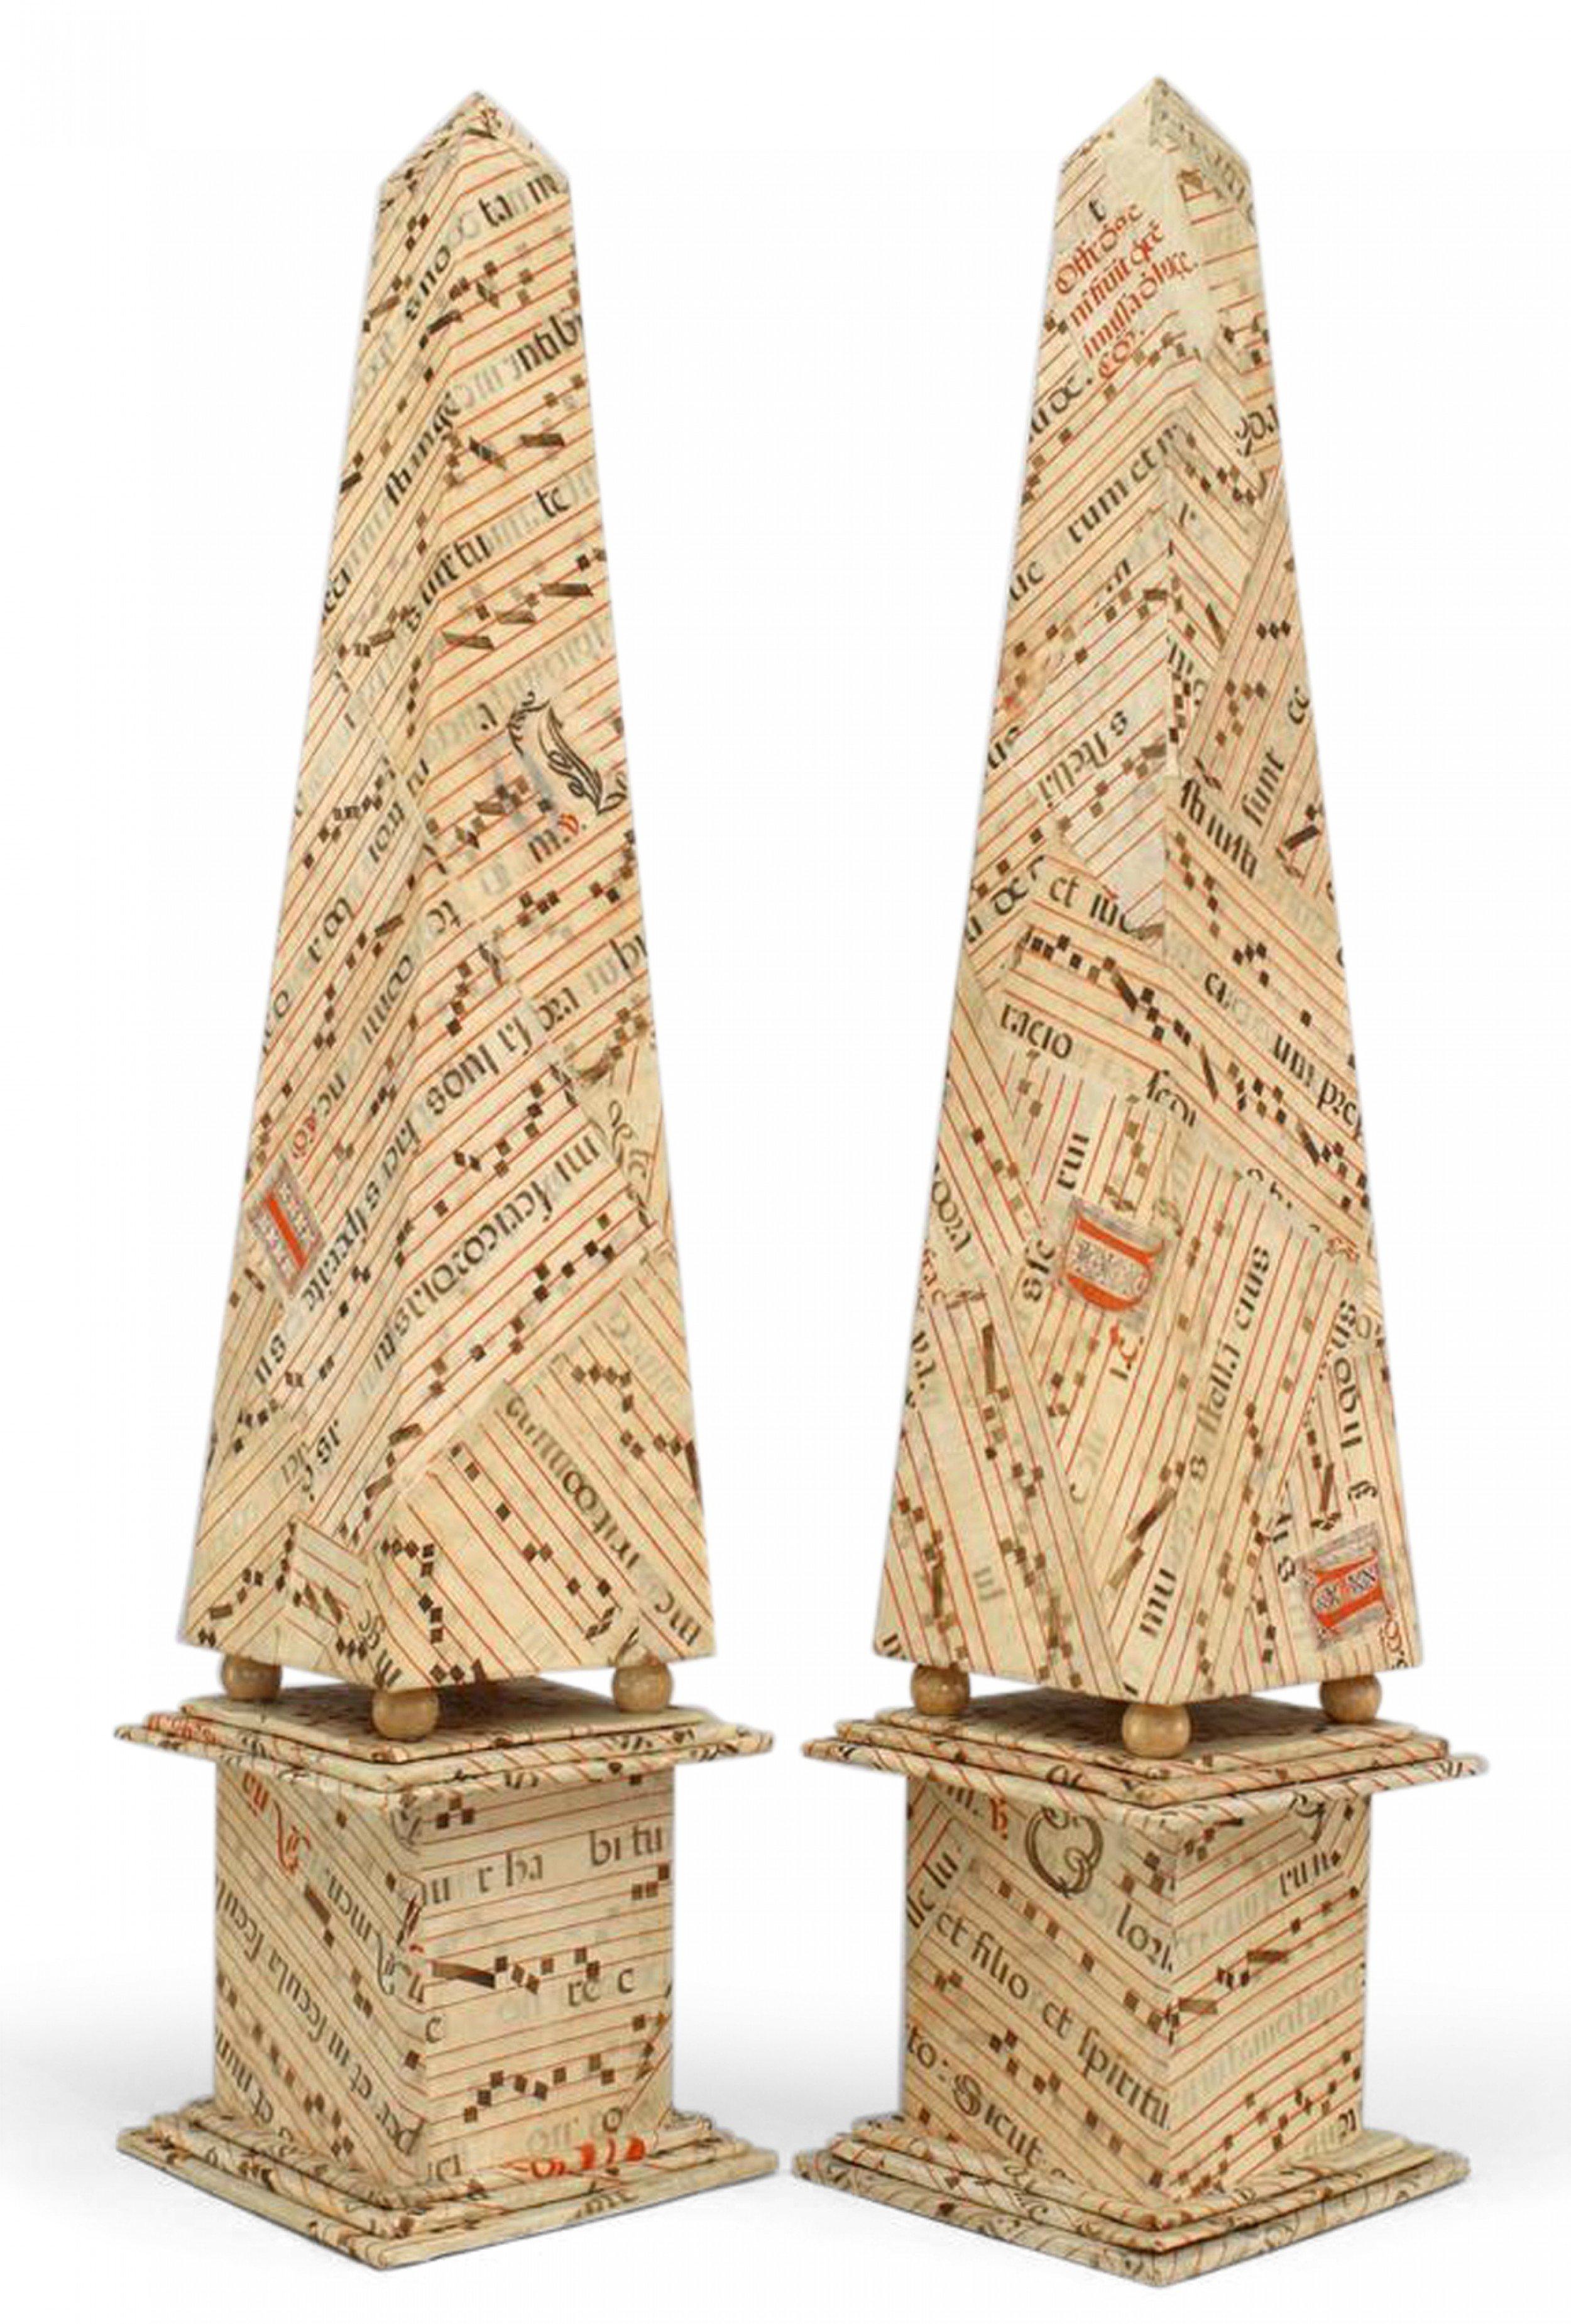 Pair of French 1940s-style antique (16th century) vellum veneered obelisks with caligraphy music manuscript notation (priced as pair).